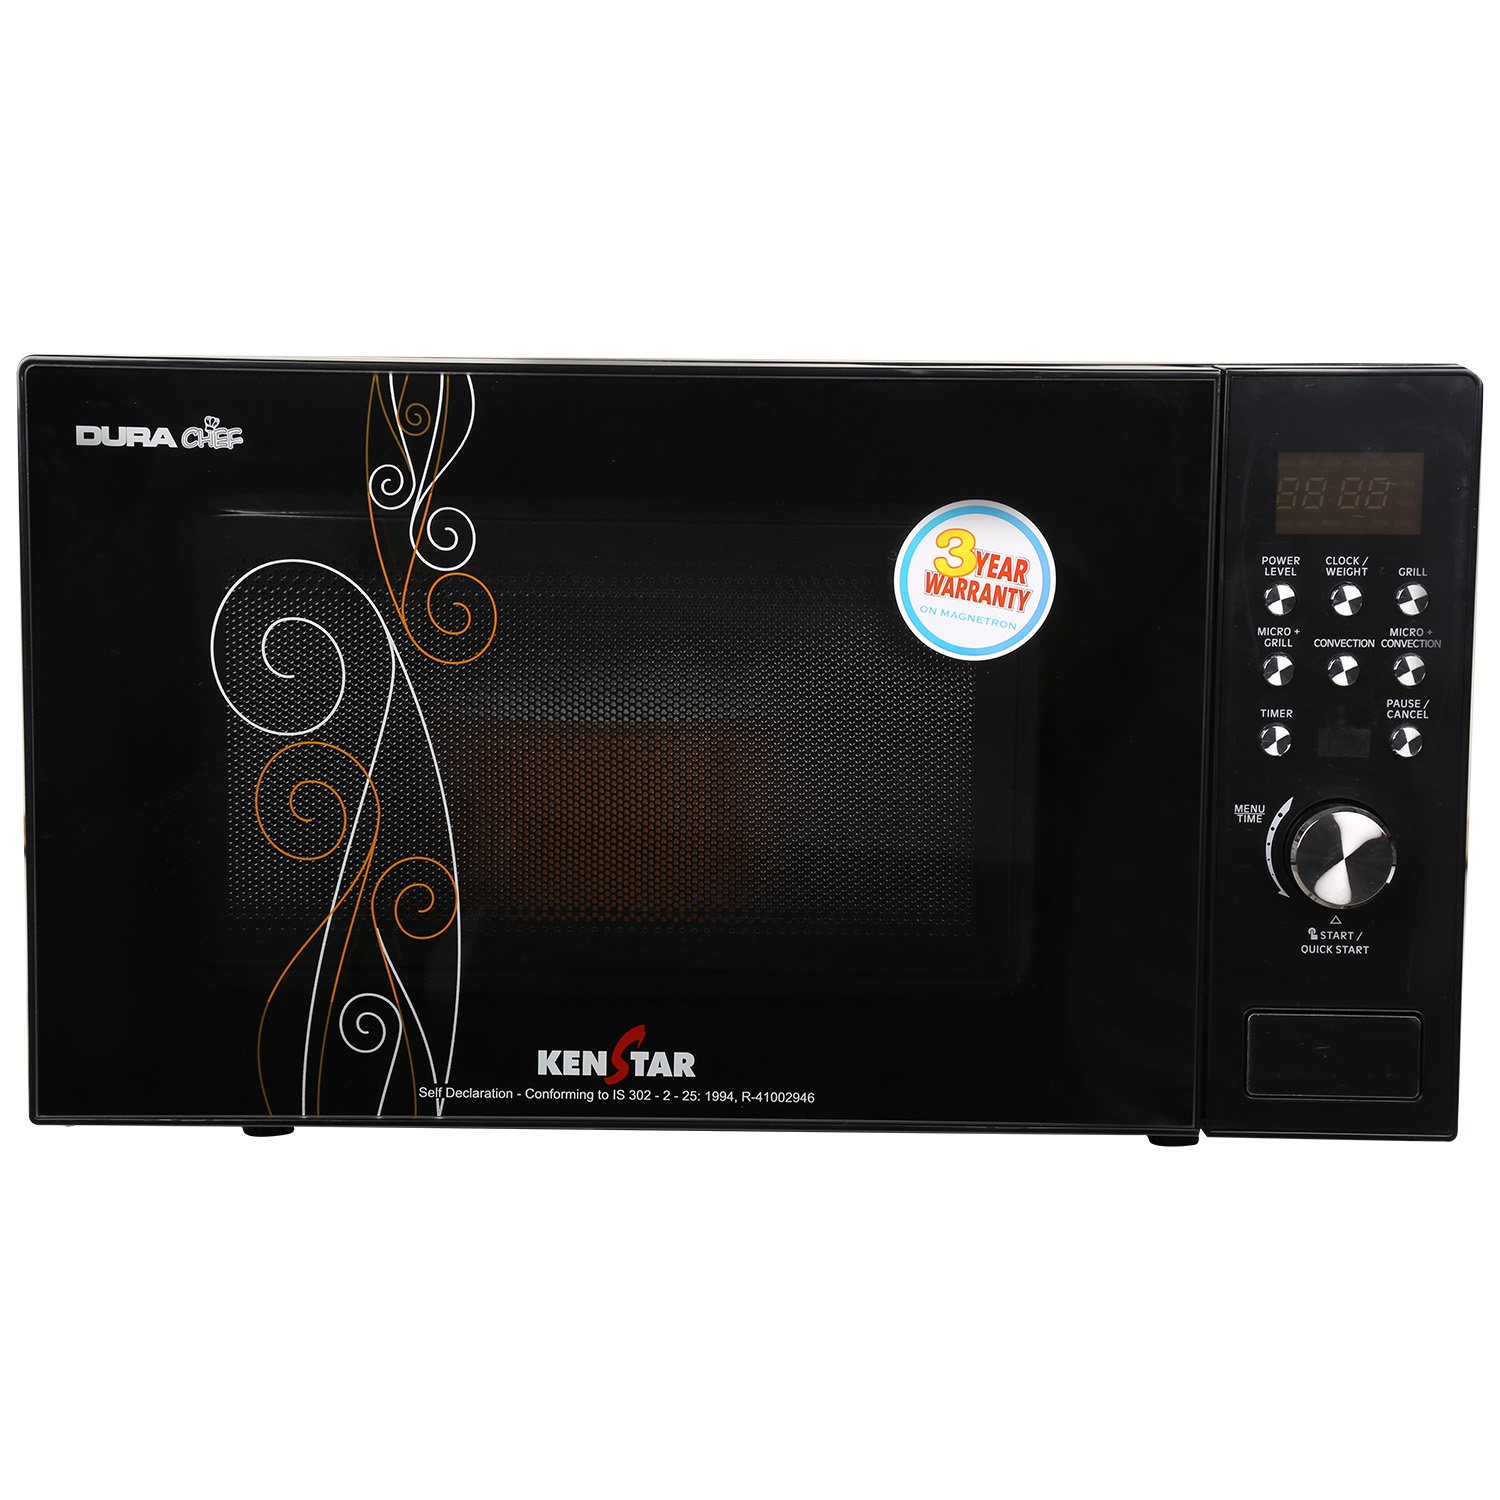 How to Use Kenstar Microwave? 